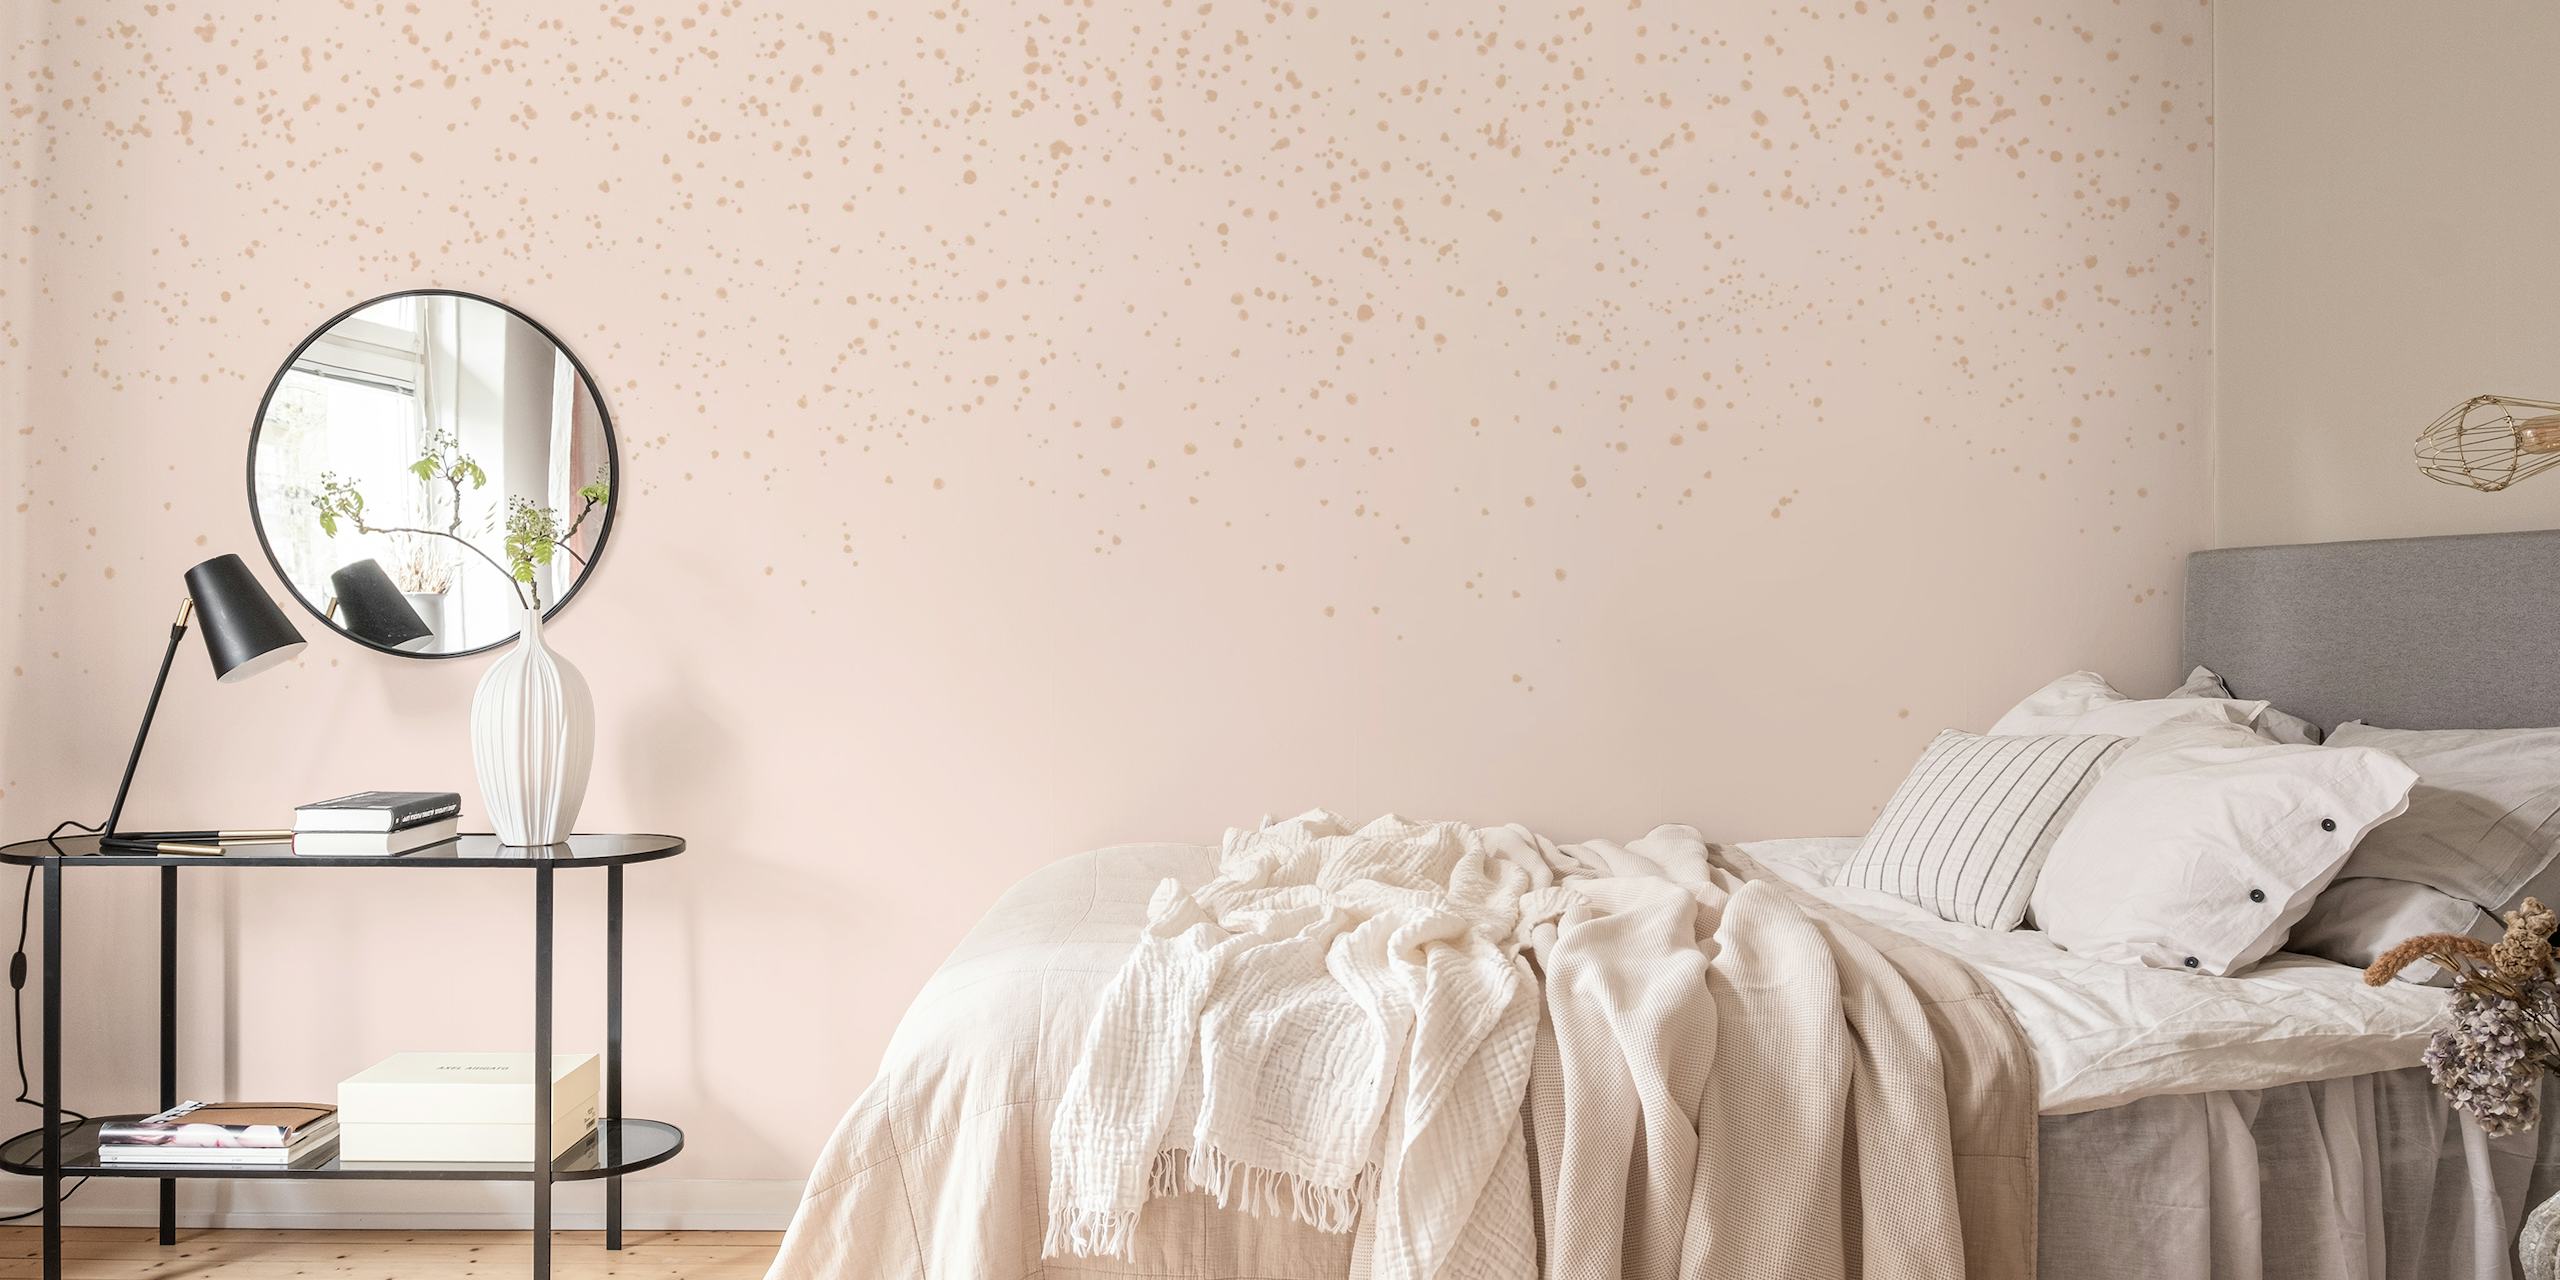 A softly textured pink blush, beige, and gold curtain wall mural.